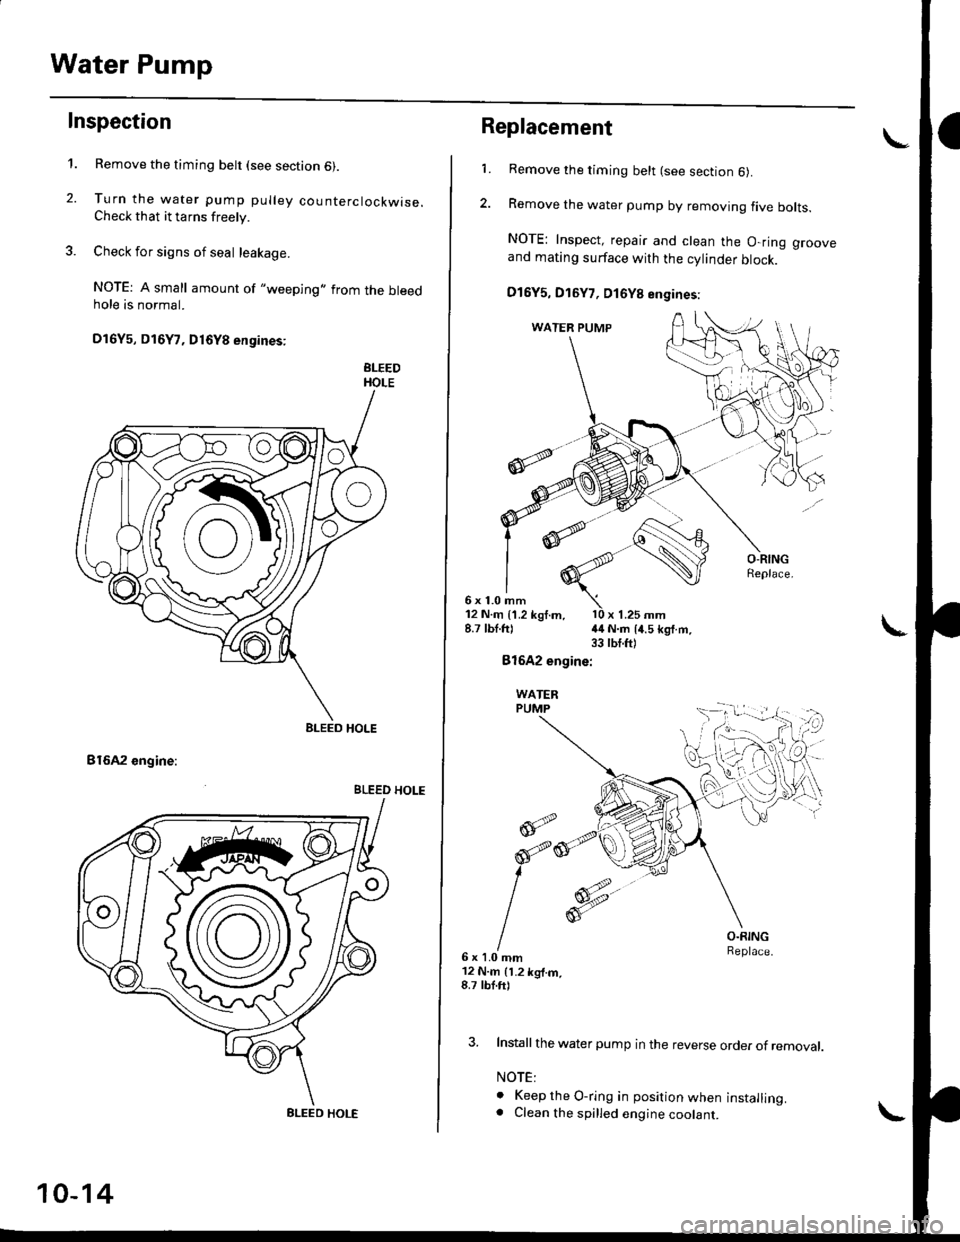 HONDA CIVIC 1999 6.G Owners Manual Water Pump
Inspection
t.
2.
Remove the timing belt (see section 6).
Turn the water pump pulley counterclockwise.Check that it tarns freely.
Check for signs of seal leakage.
NOTE: A small amount of "w